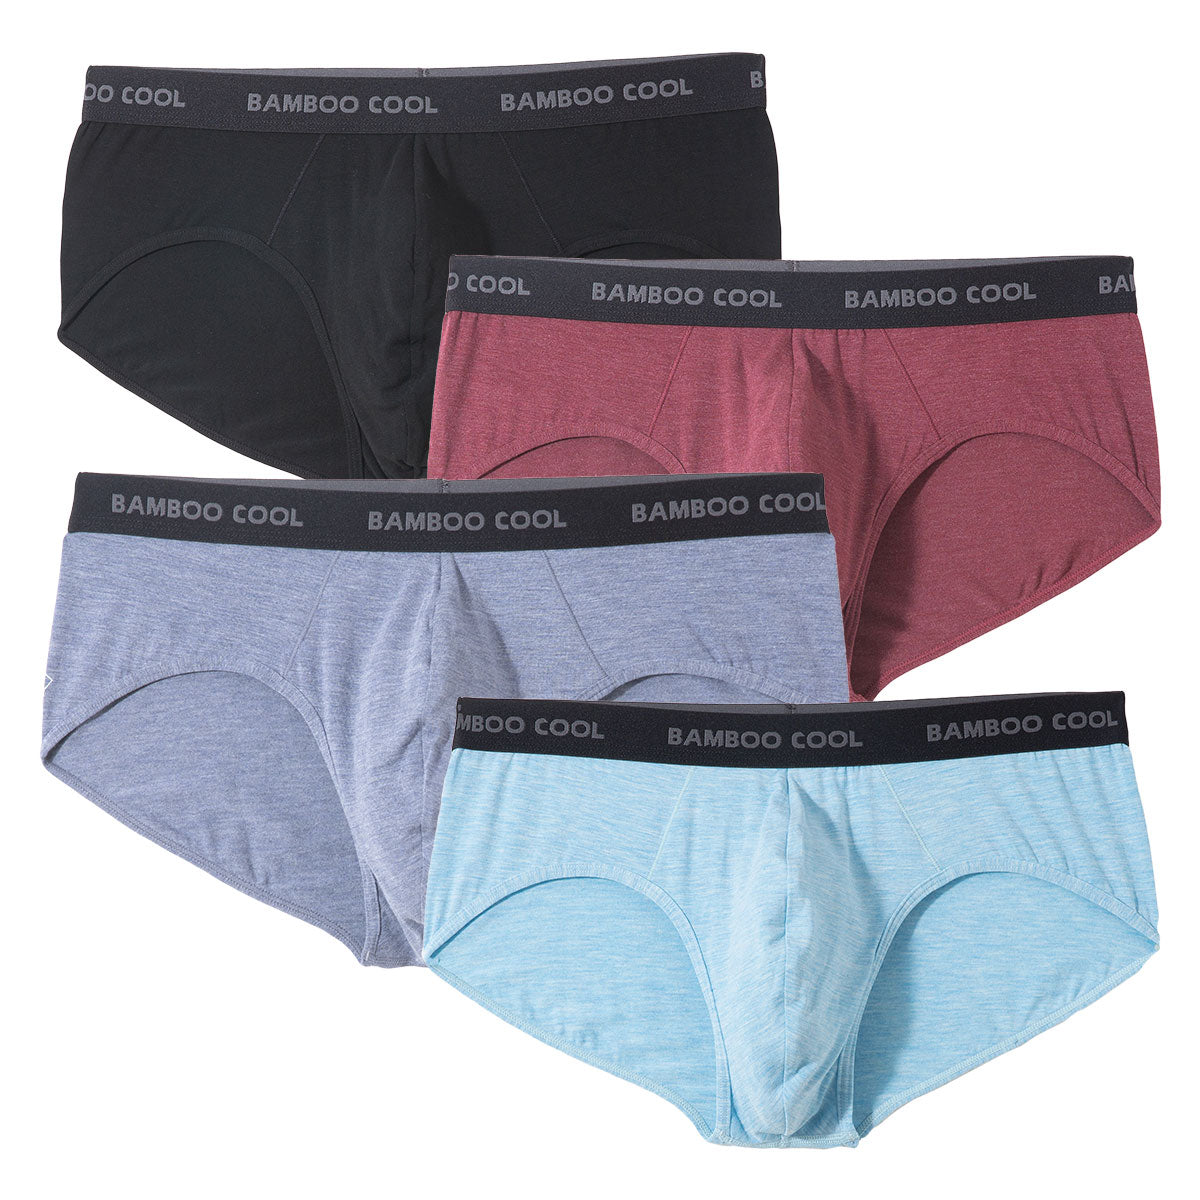 Men's Underwear (4 Pack) 4 Color – BAMBOO COOL Apparel